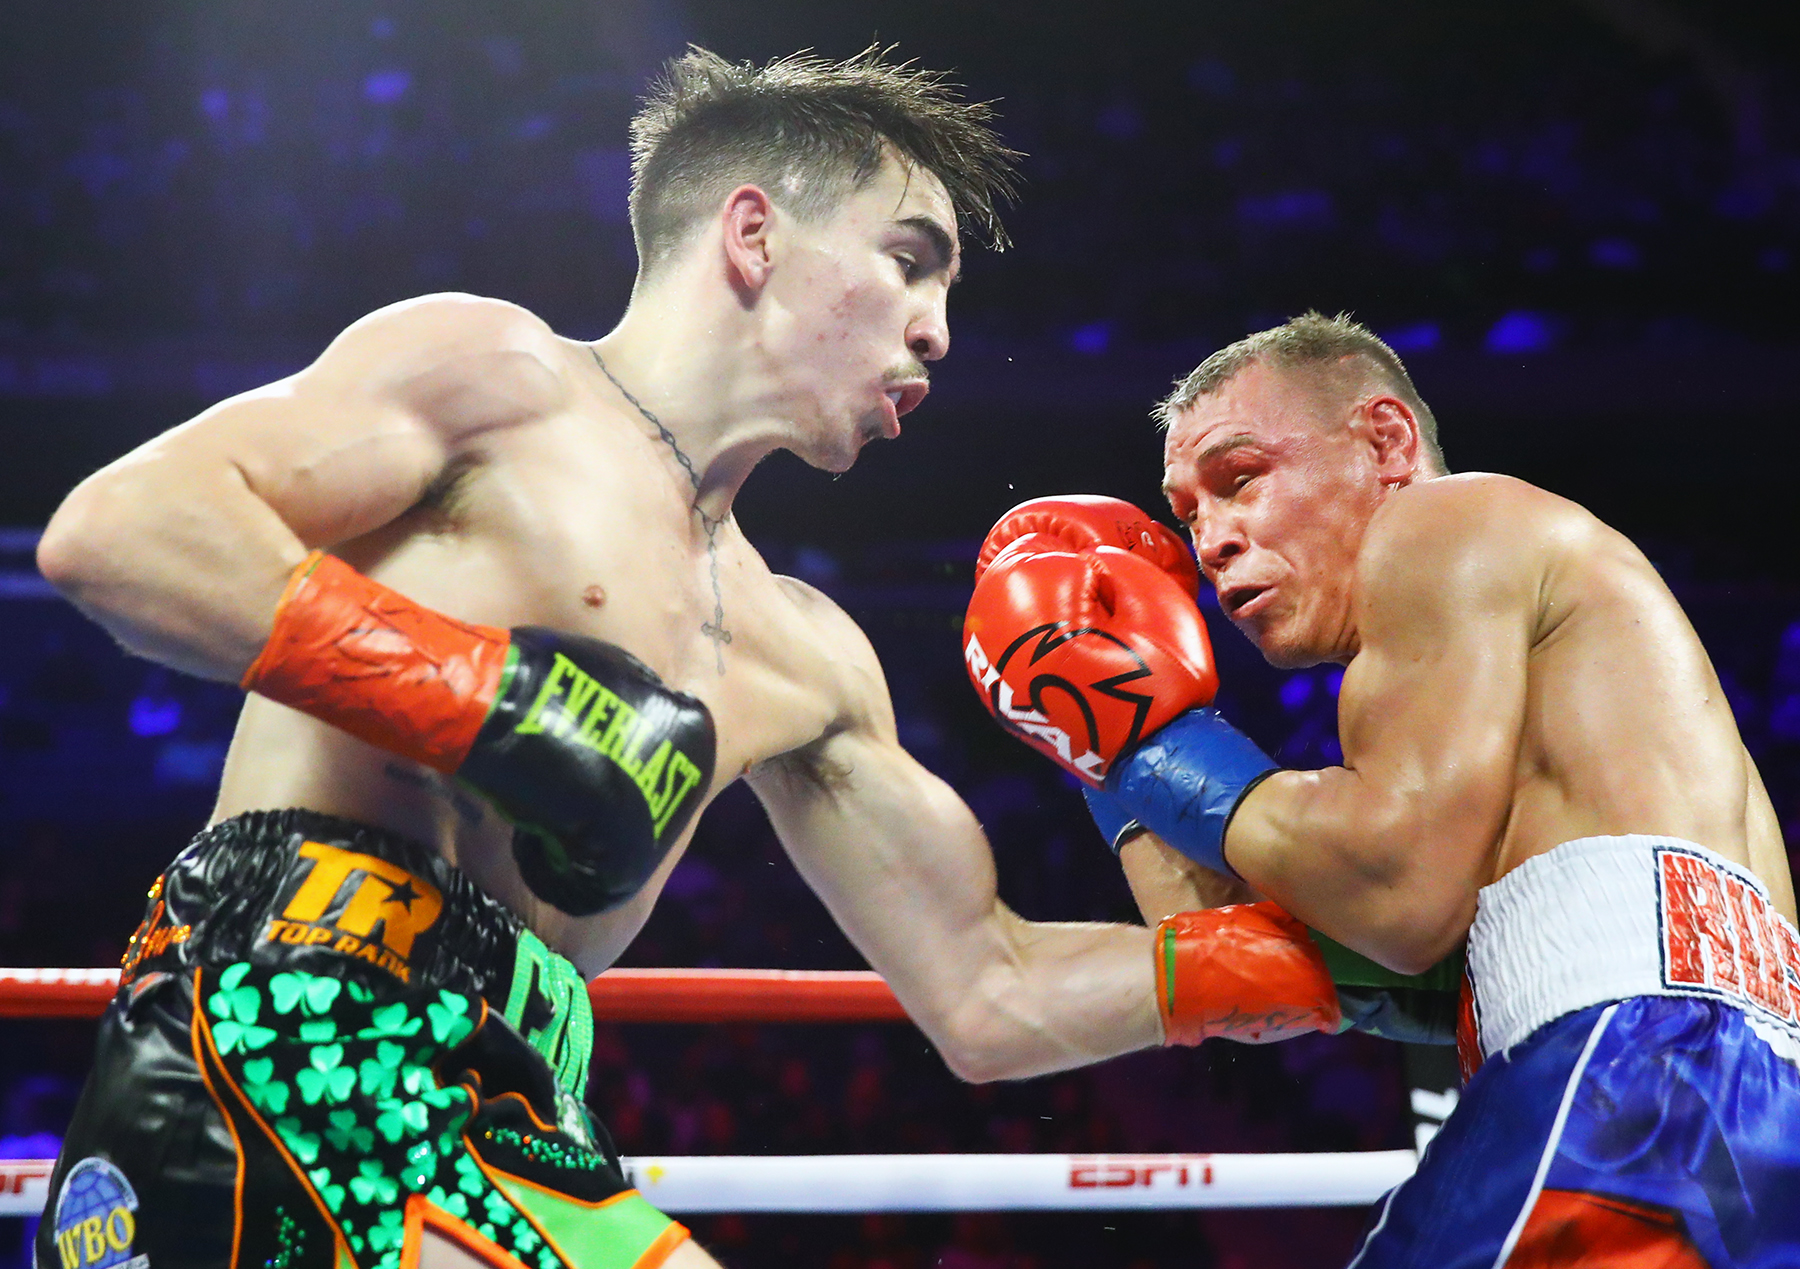 Michael Conlan faces former titleholder TJ Doheny on August 6